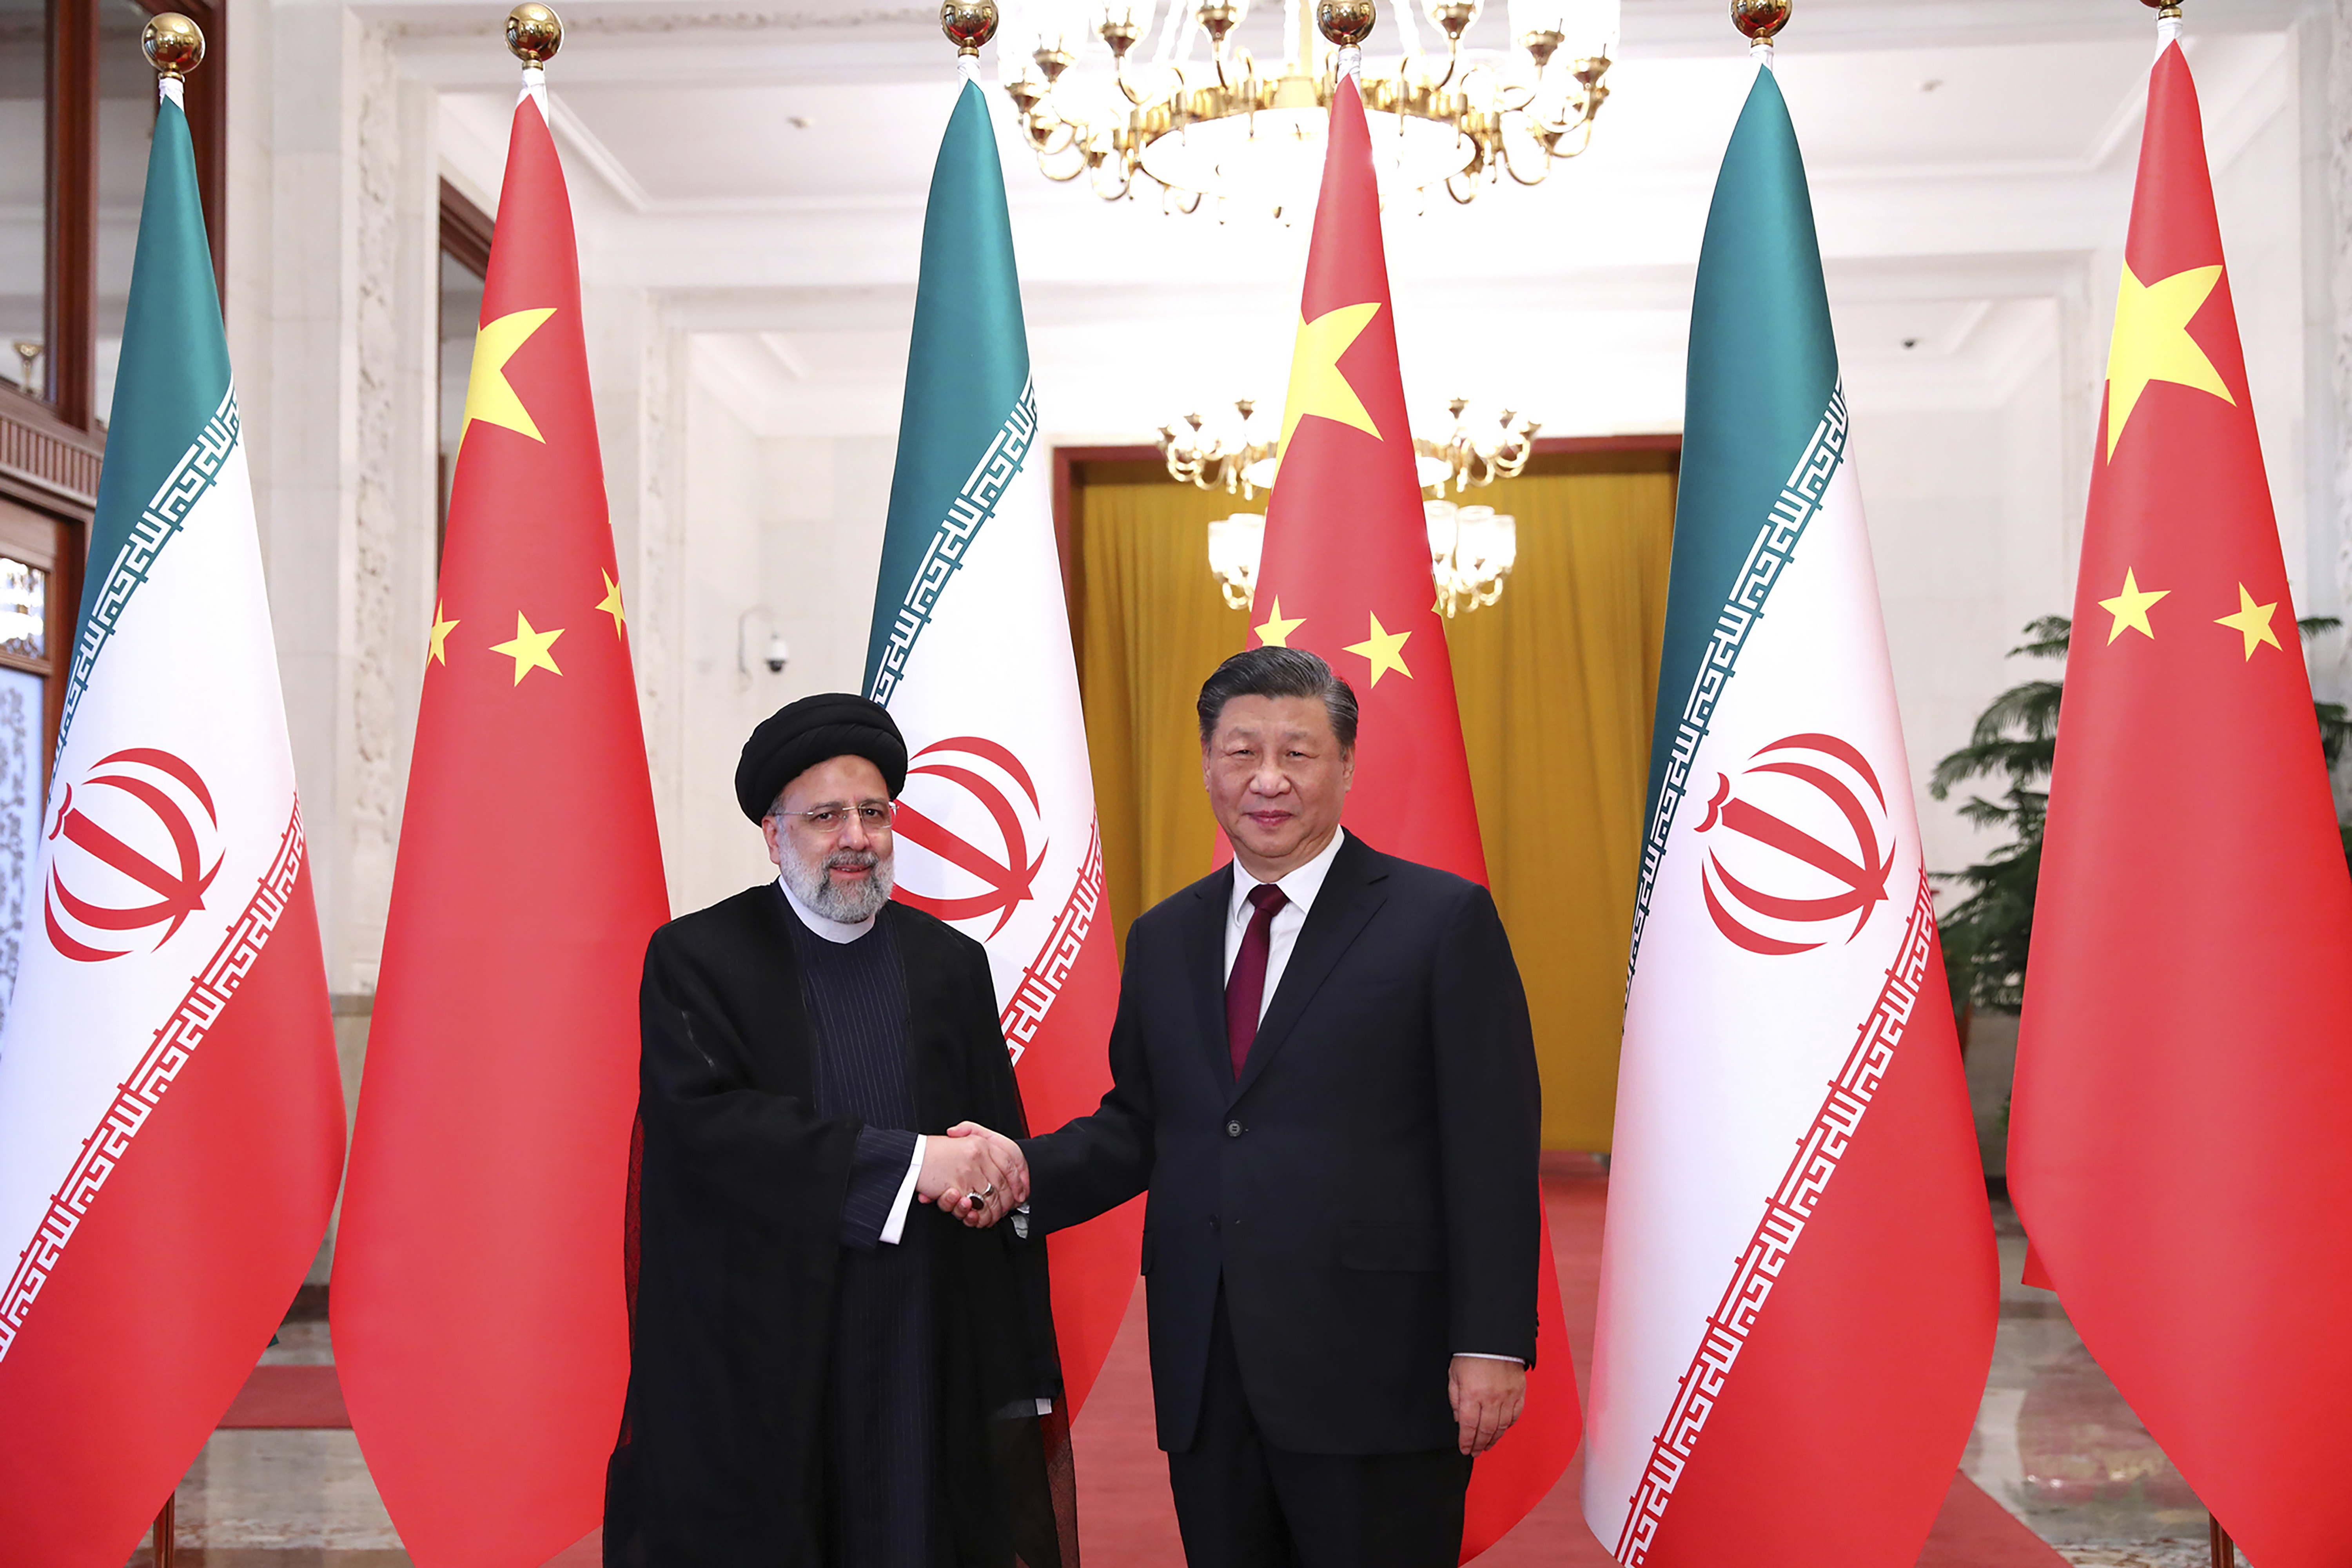 FILE - In this photo released by the official website of the Iranian presidential office, President Ebrahim Raisi, left, greets his Chinese counterpart Xi Jinping at an official welcoming ceremony in Beijing, Tuesday, February 14, 2023. (Iranian presidential office via AP, file)